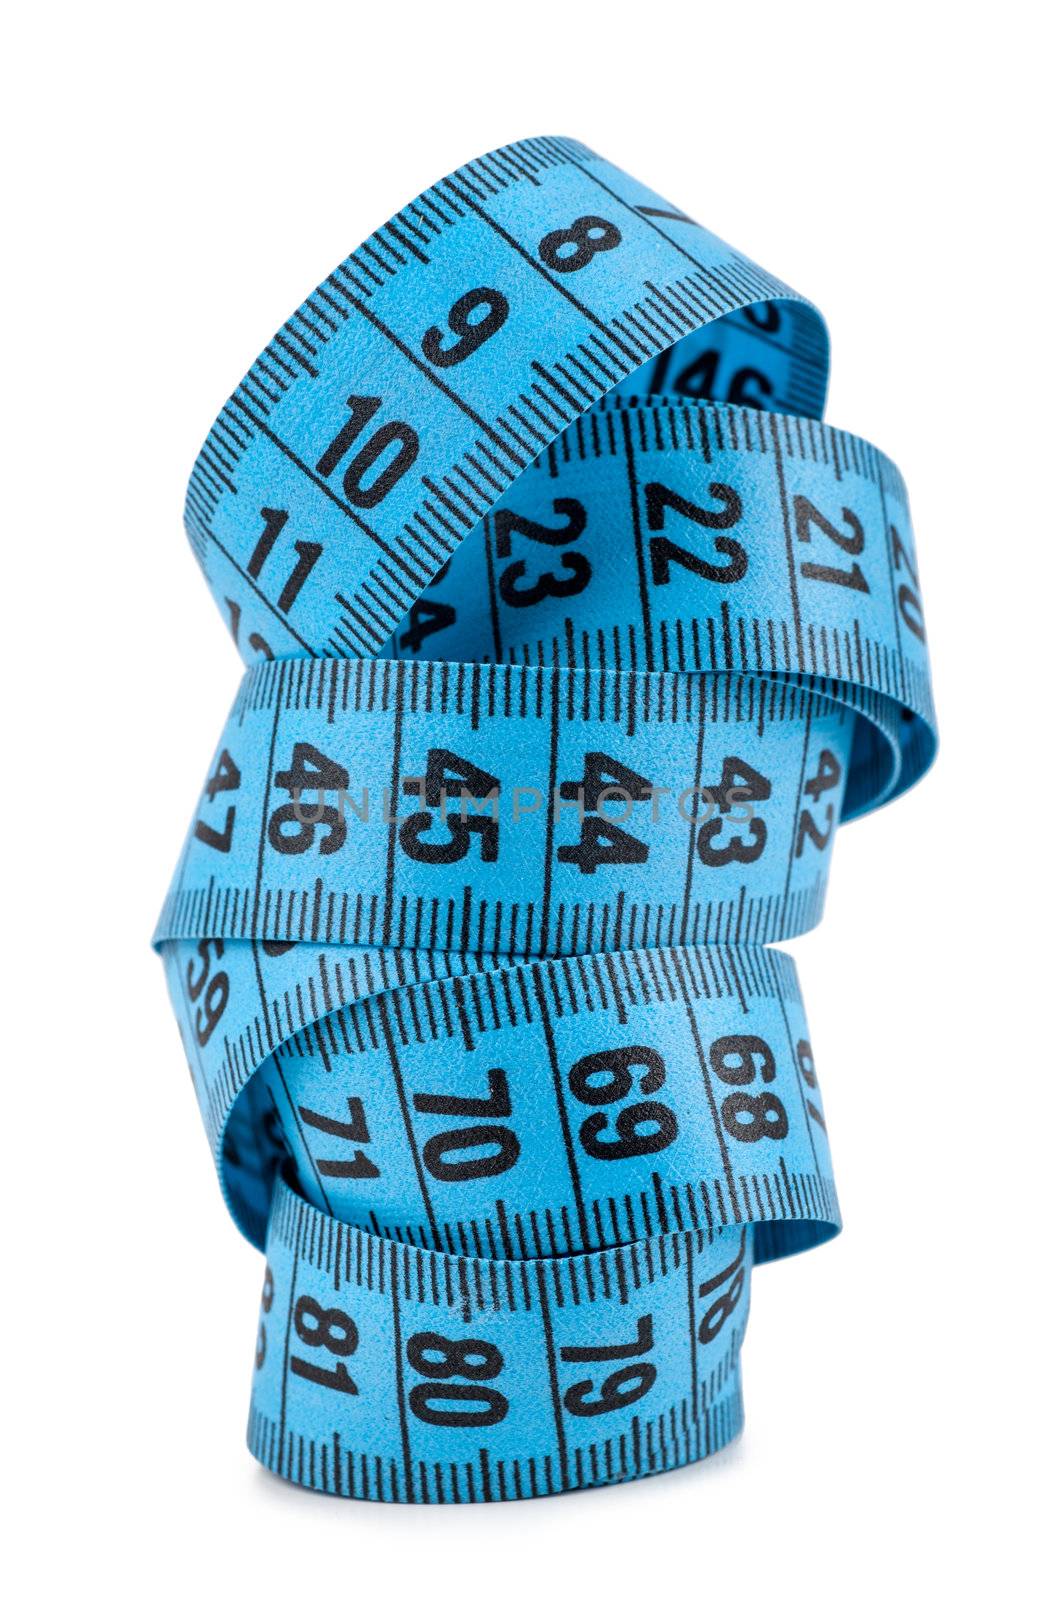 Measuring tape by AGorohov